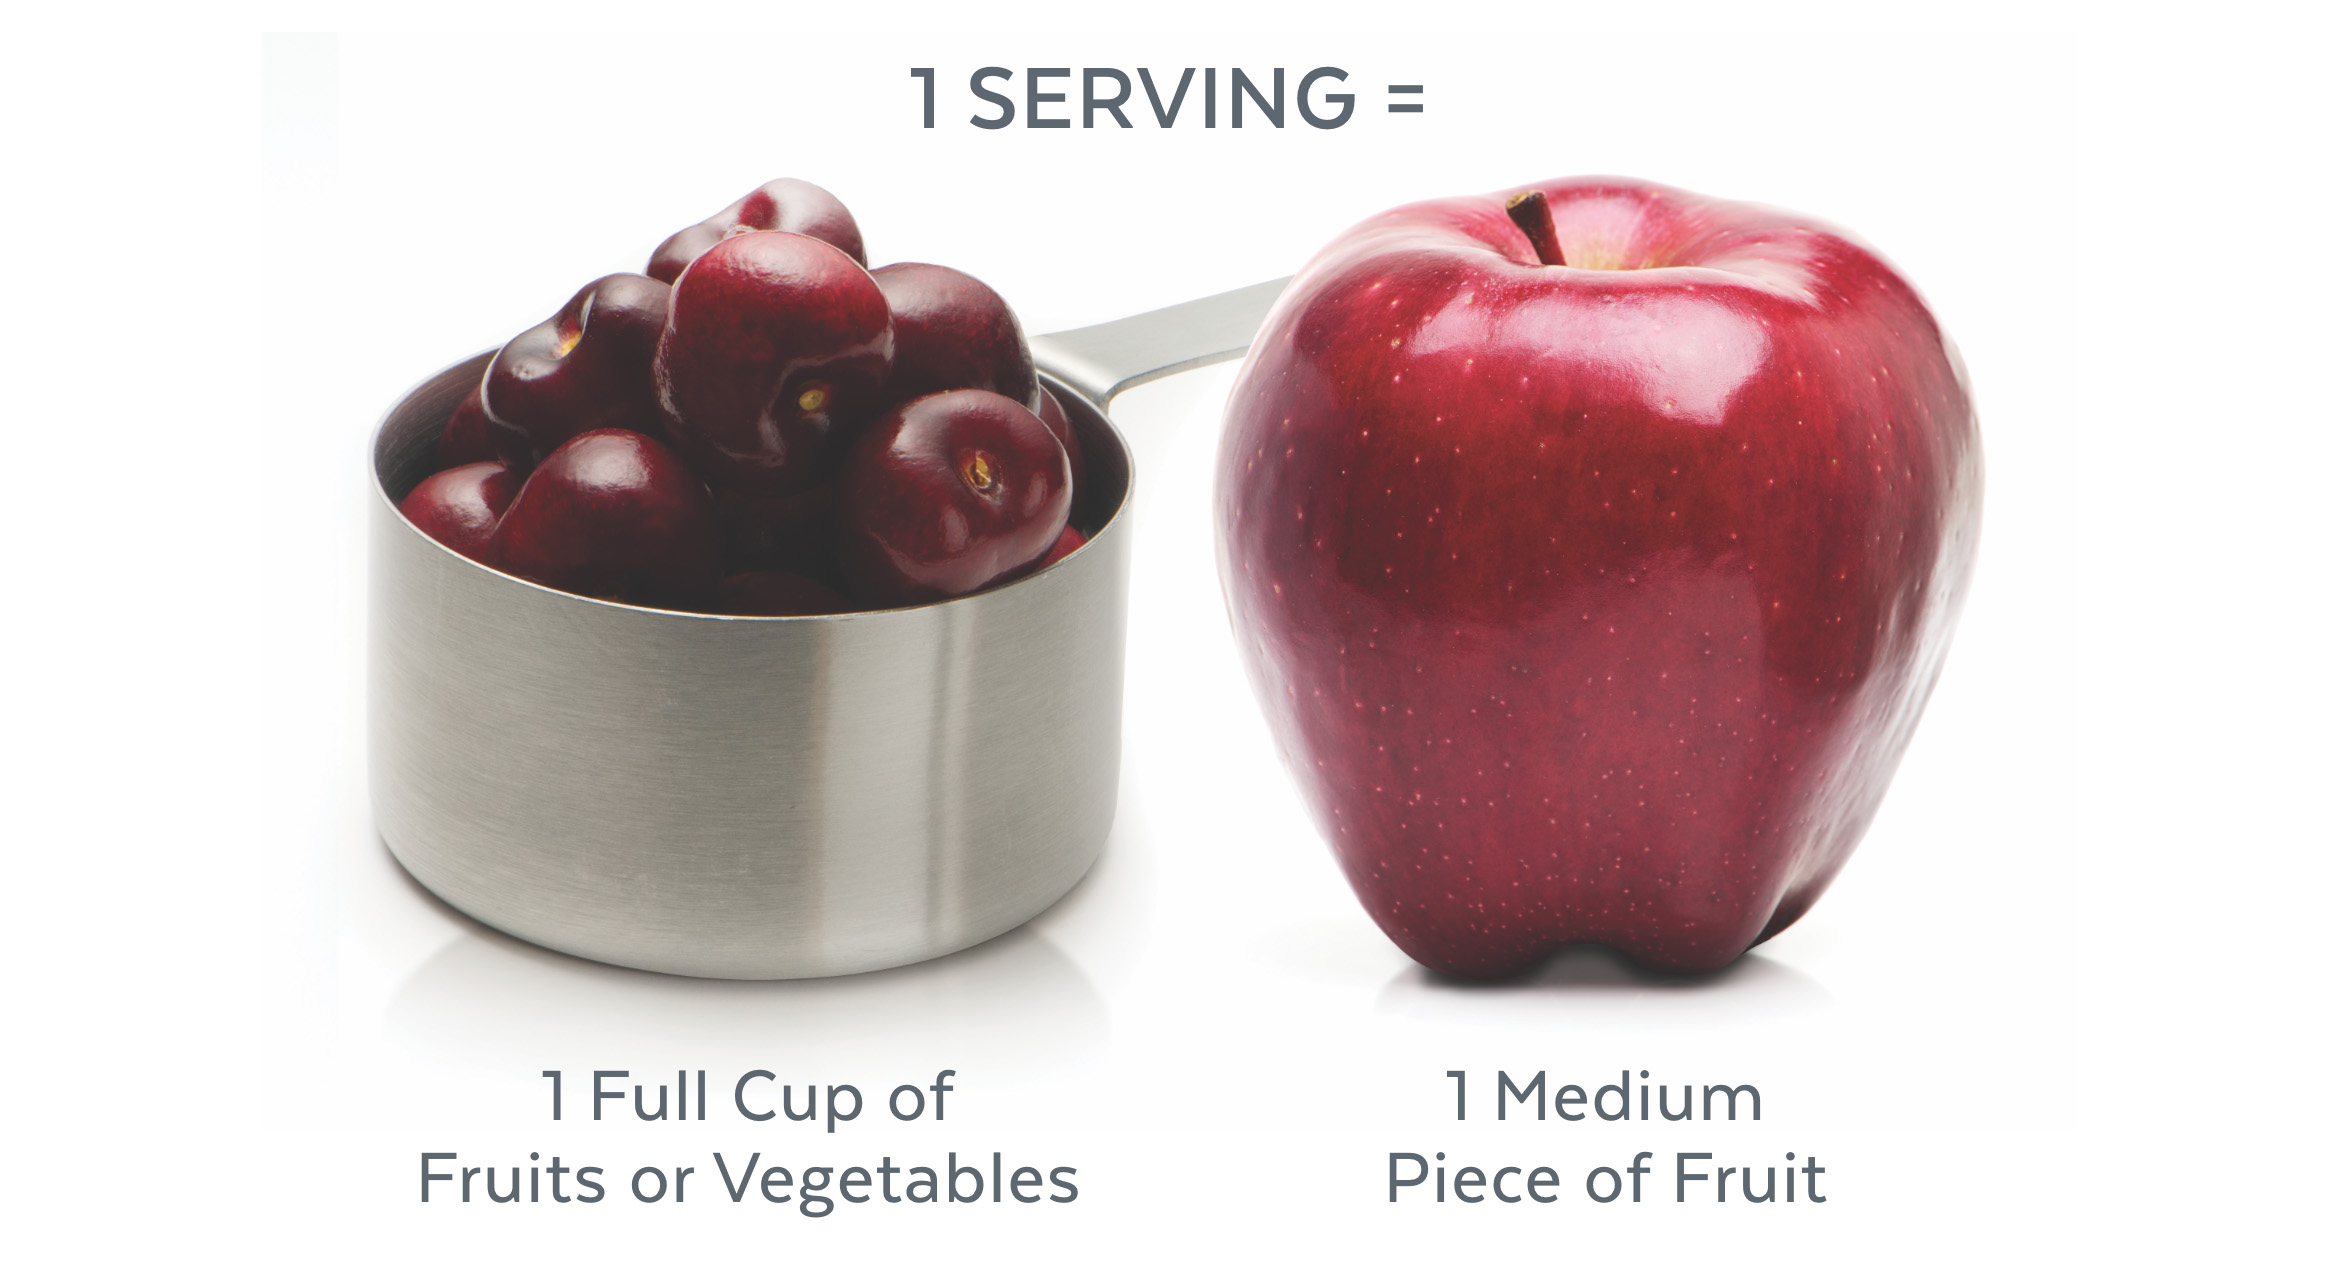 One full cup of fruits or vegetables is typically  equivalent to 1 Medium piece of fruit